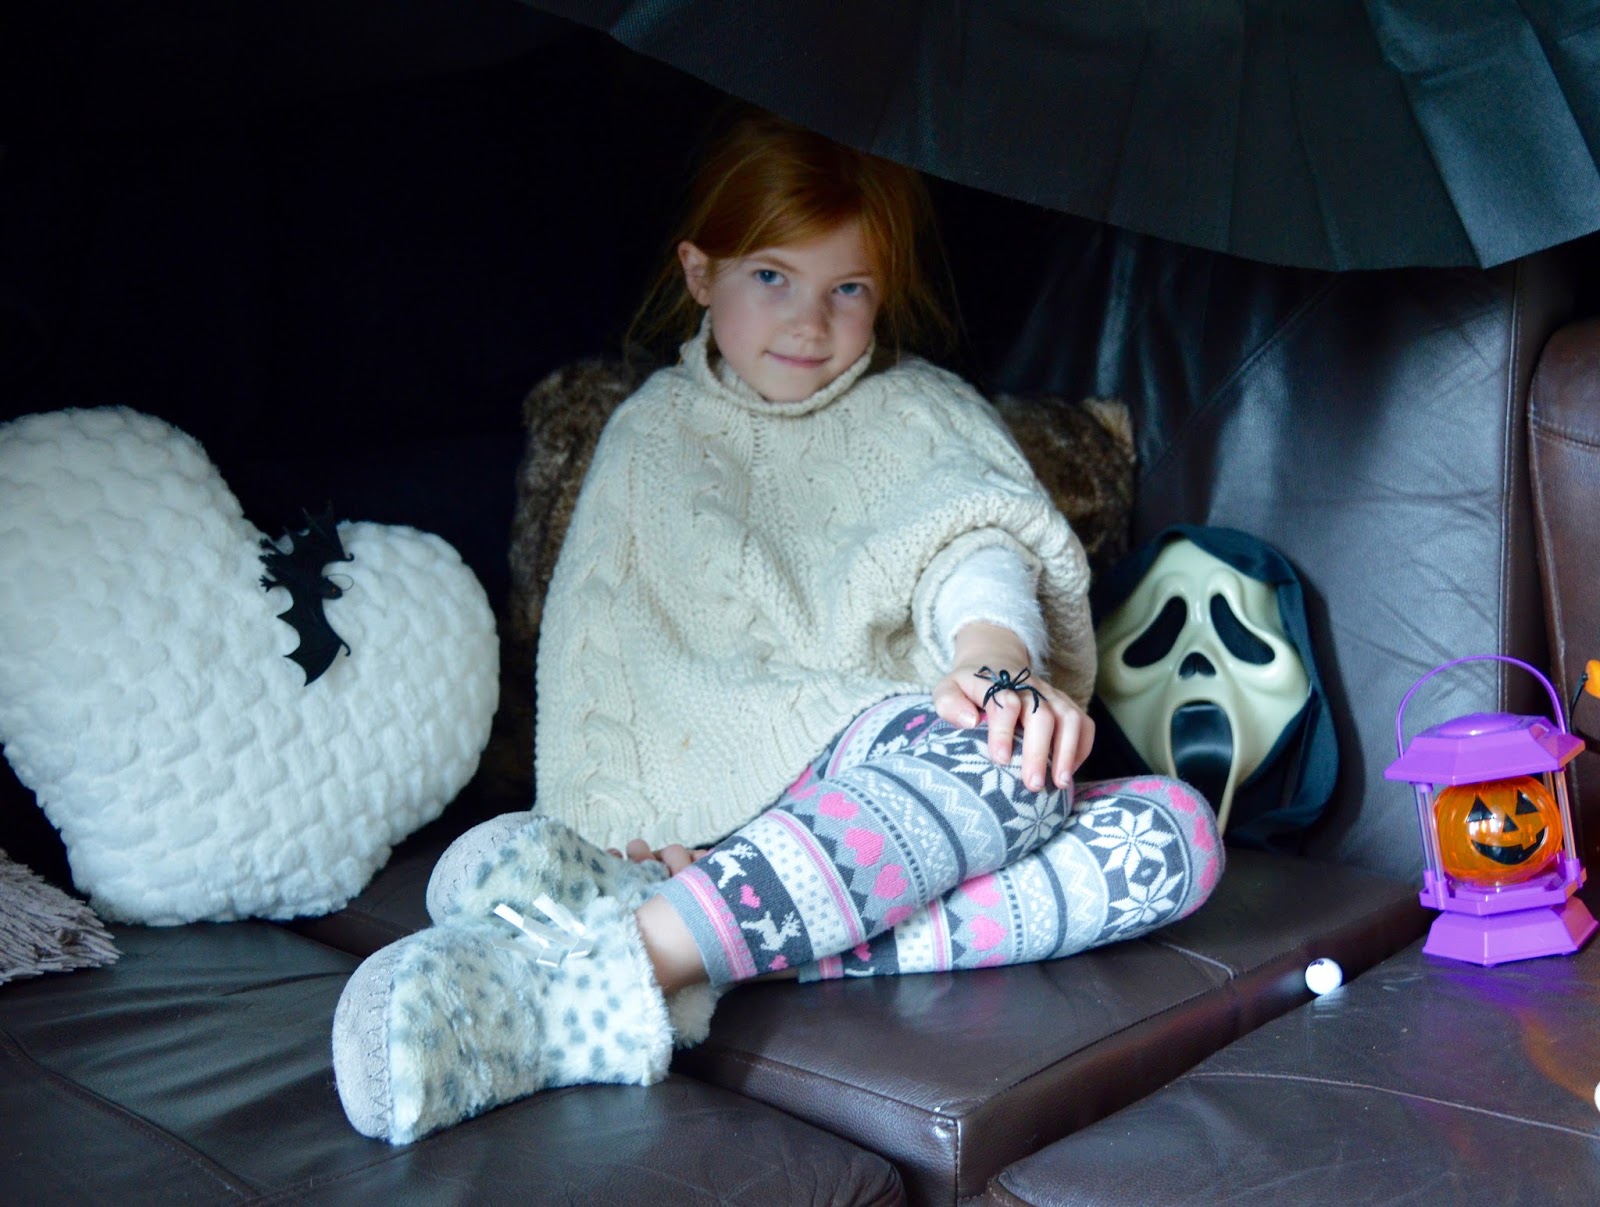 How to create an awesome sofa den for Halloween with DFS #MySofaDen